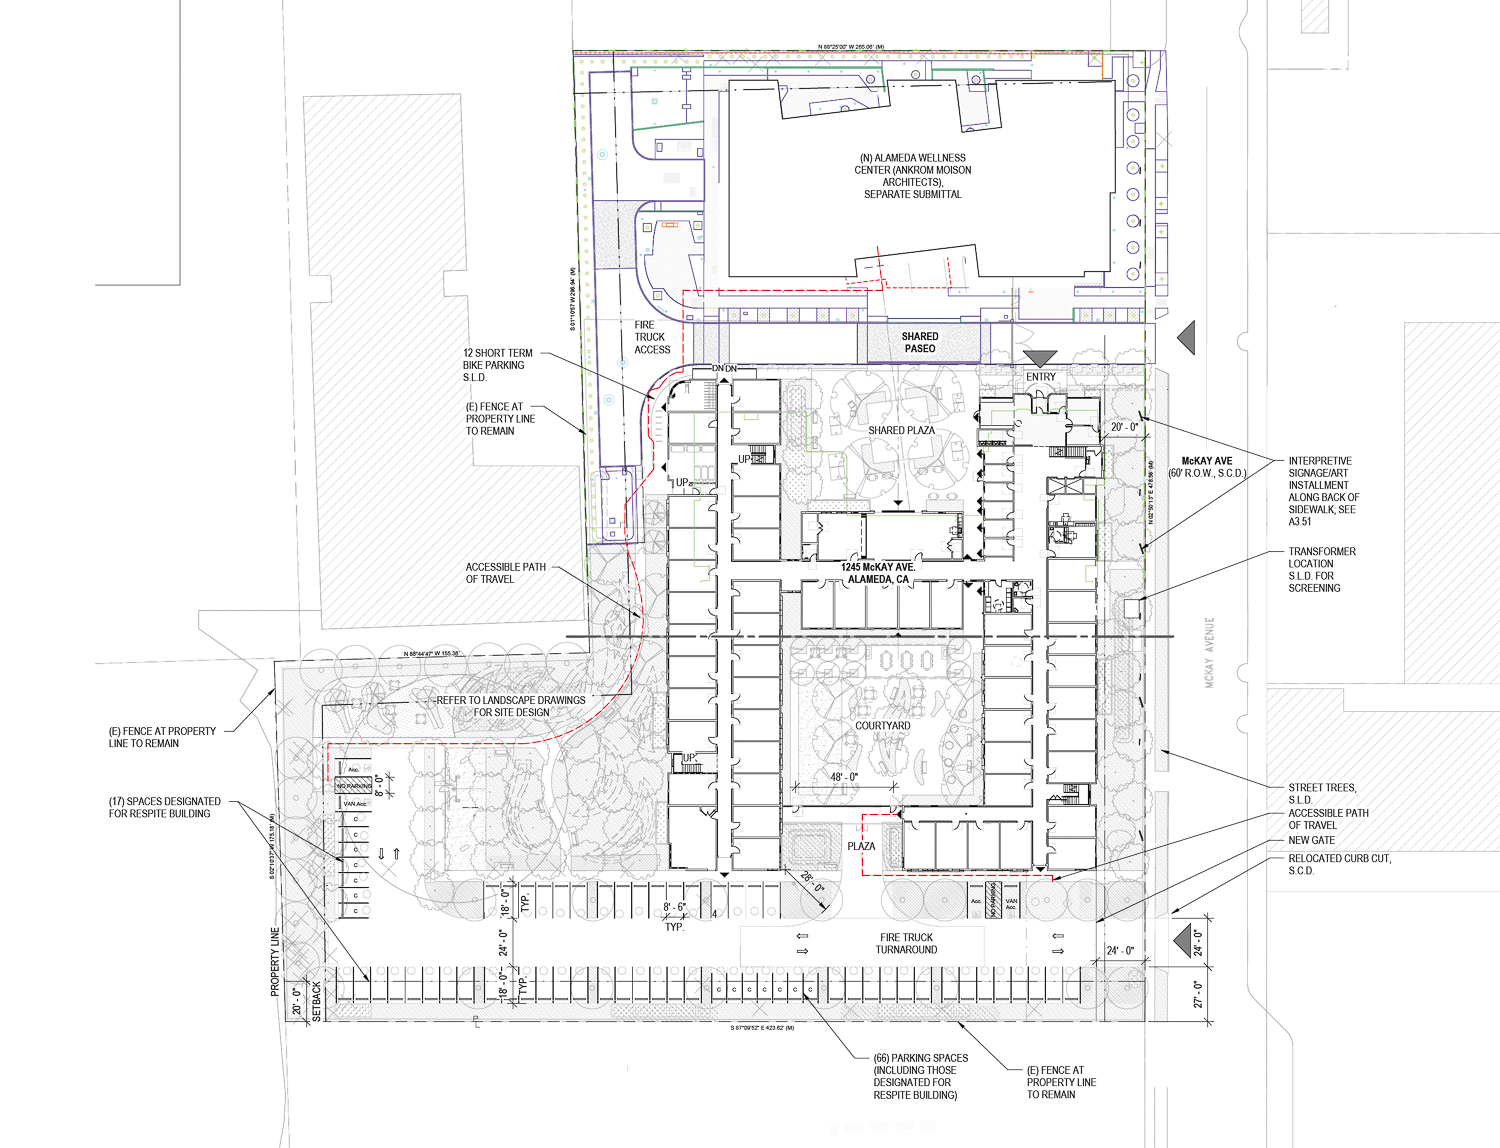 1245 McKay Avenue site map showing the Alameda Wellness Center on the top, illustration by Pyatok